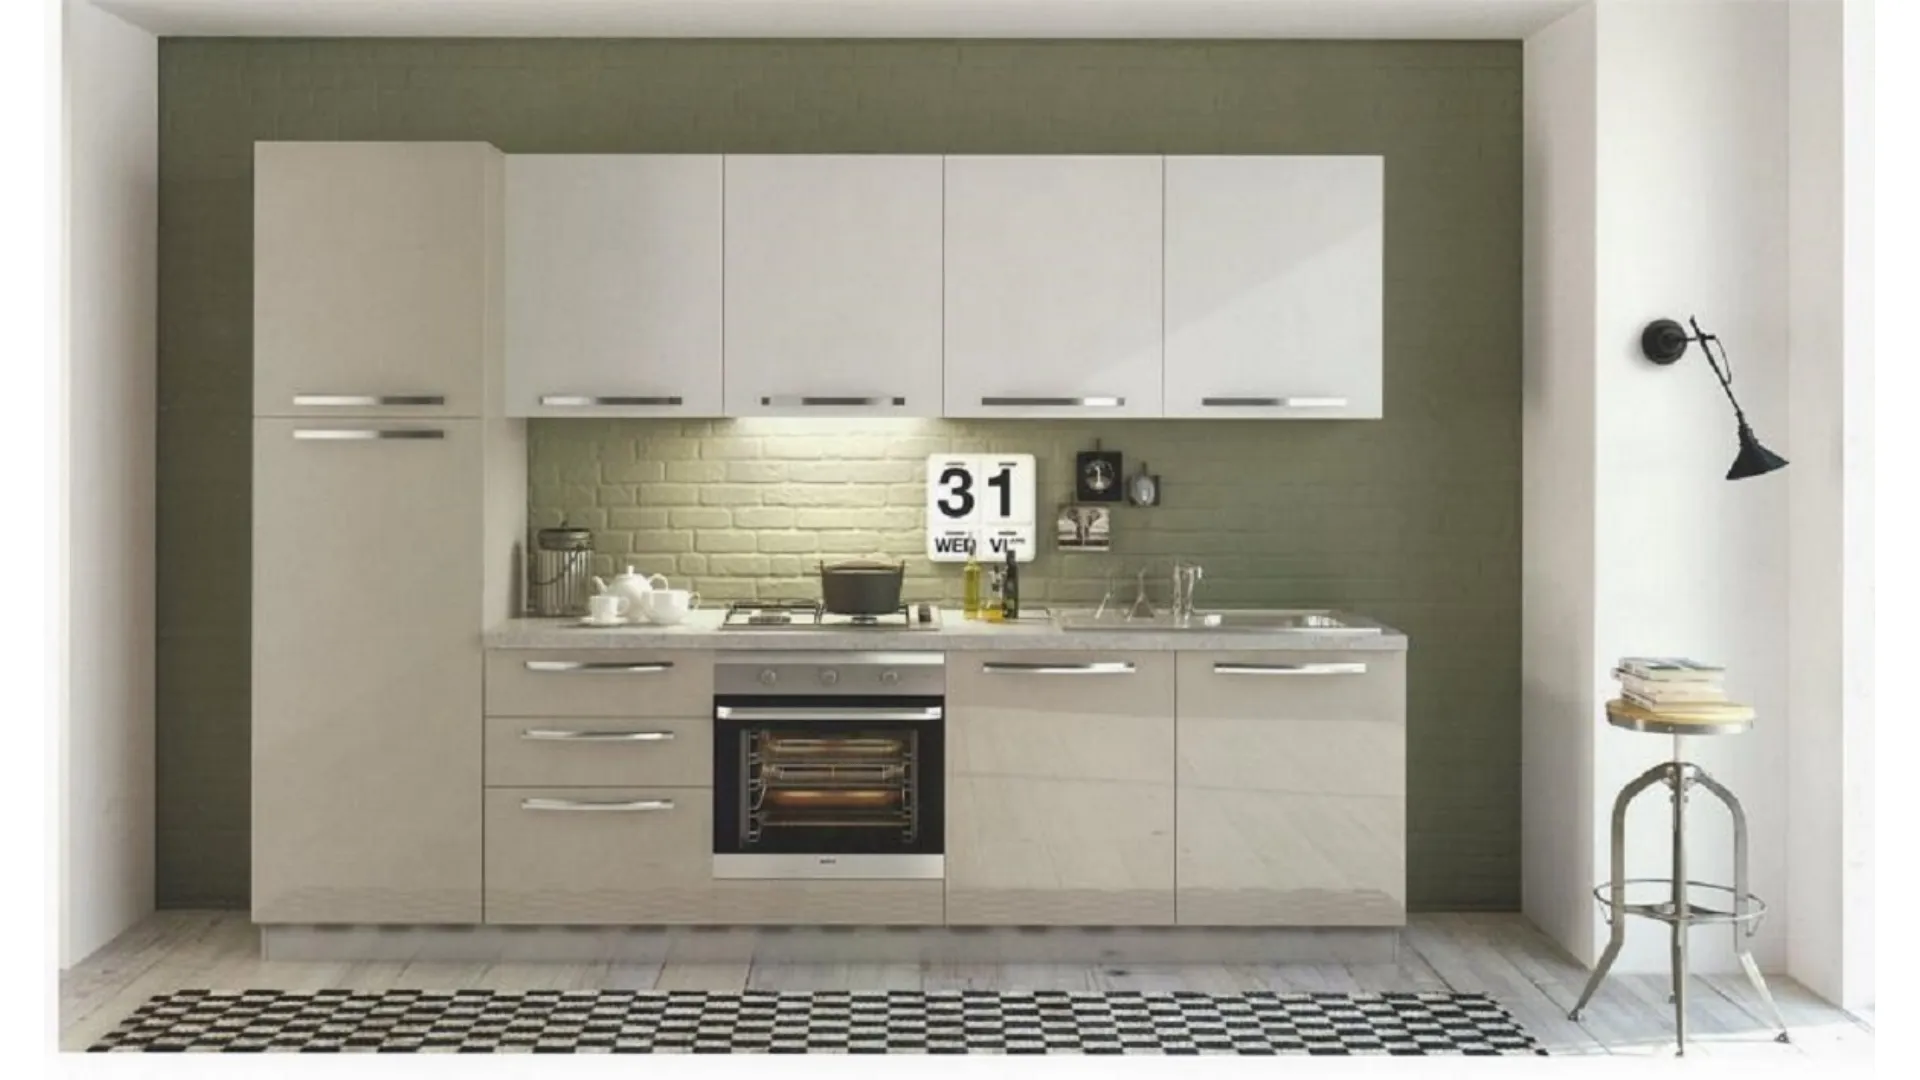 Modern Linear Kitchen of Qualit Mottes Occasional Furniture